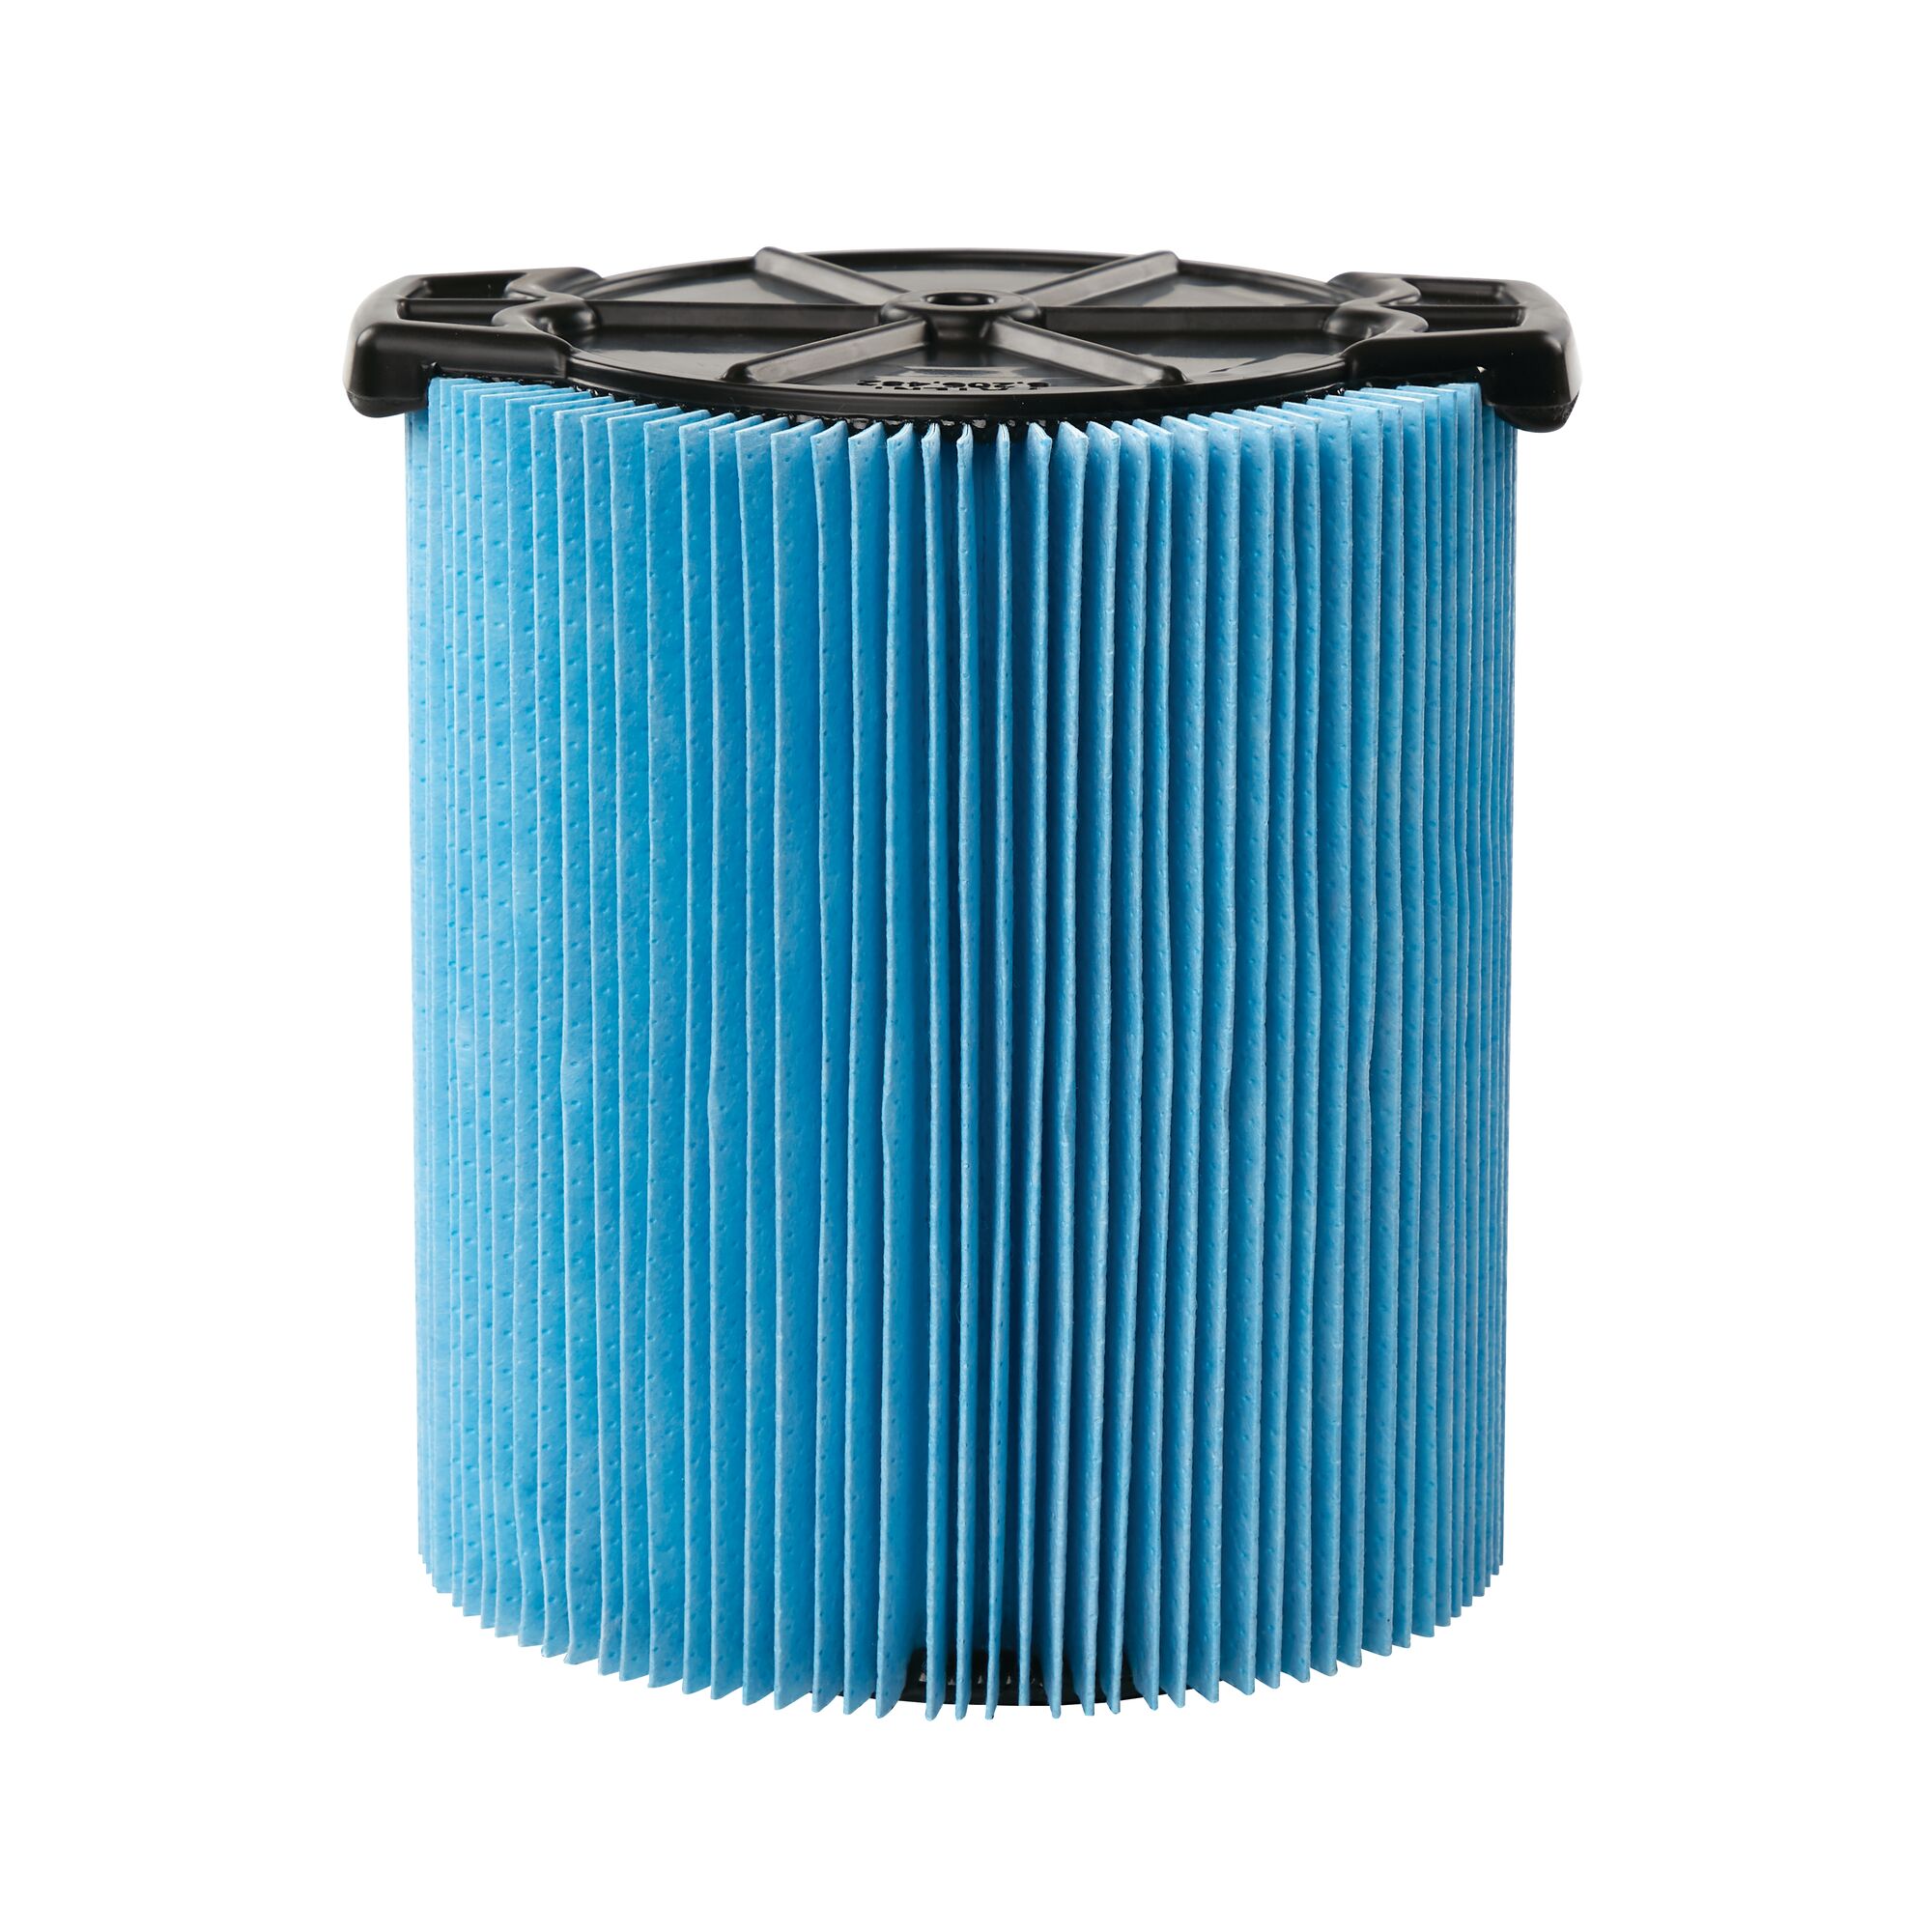 Fine Dust Wet/Dry Vac Filter for 5 to 20 Gal. Wet/Dry Vacs | CRAFTSMAN